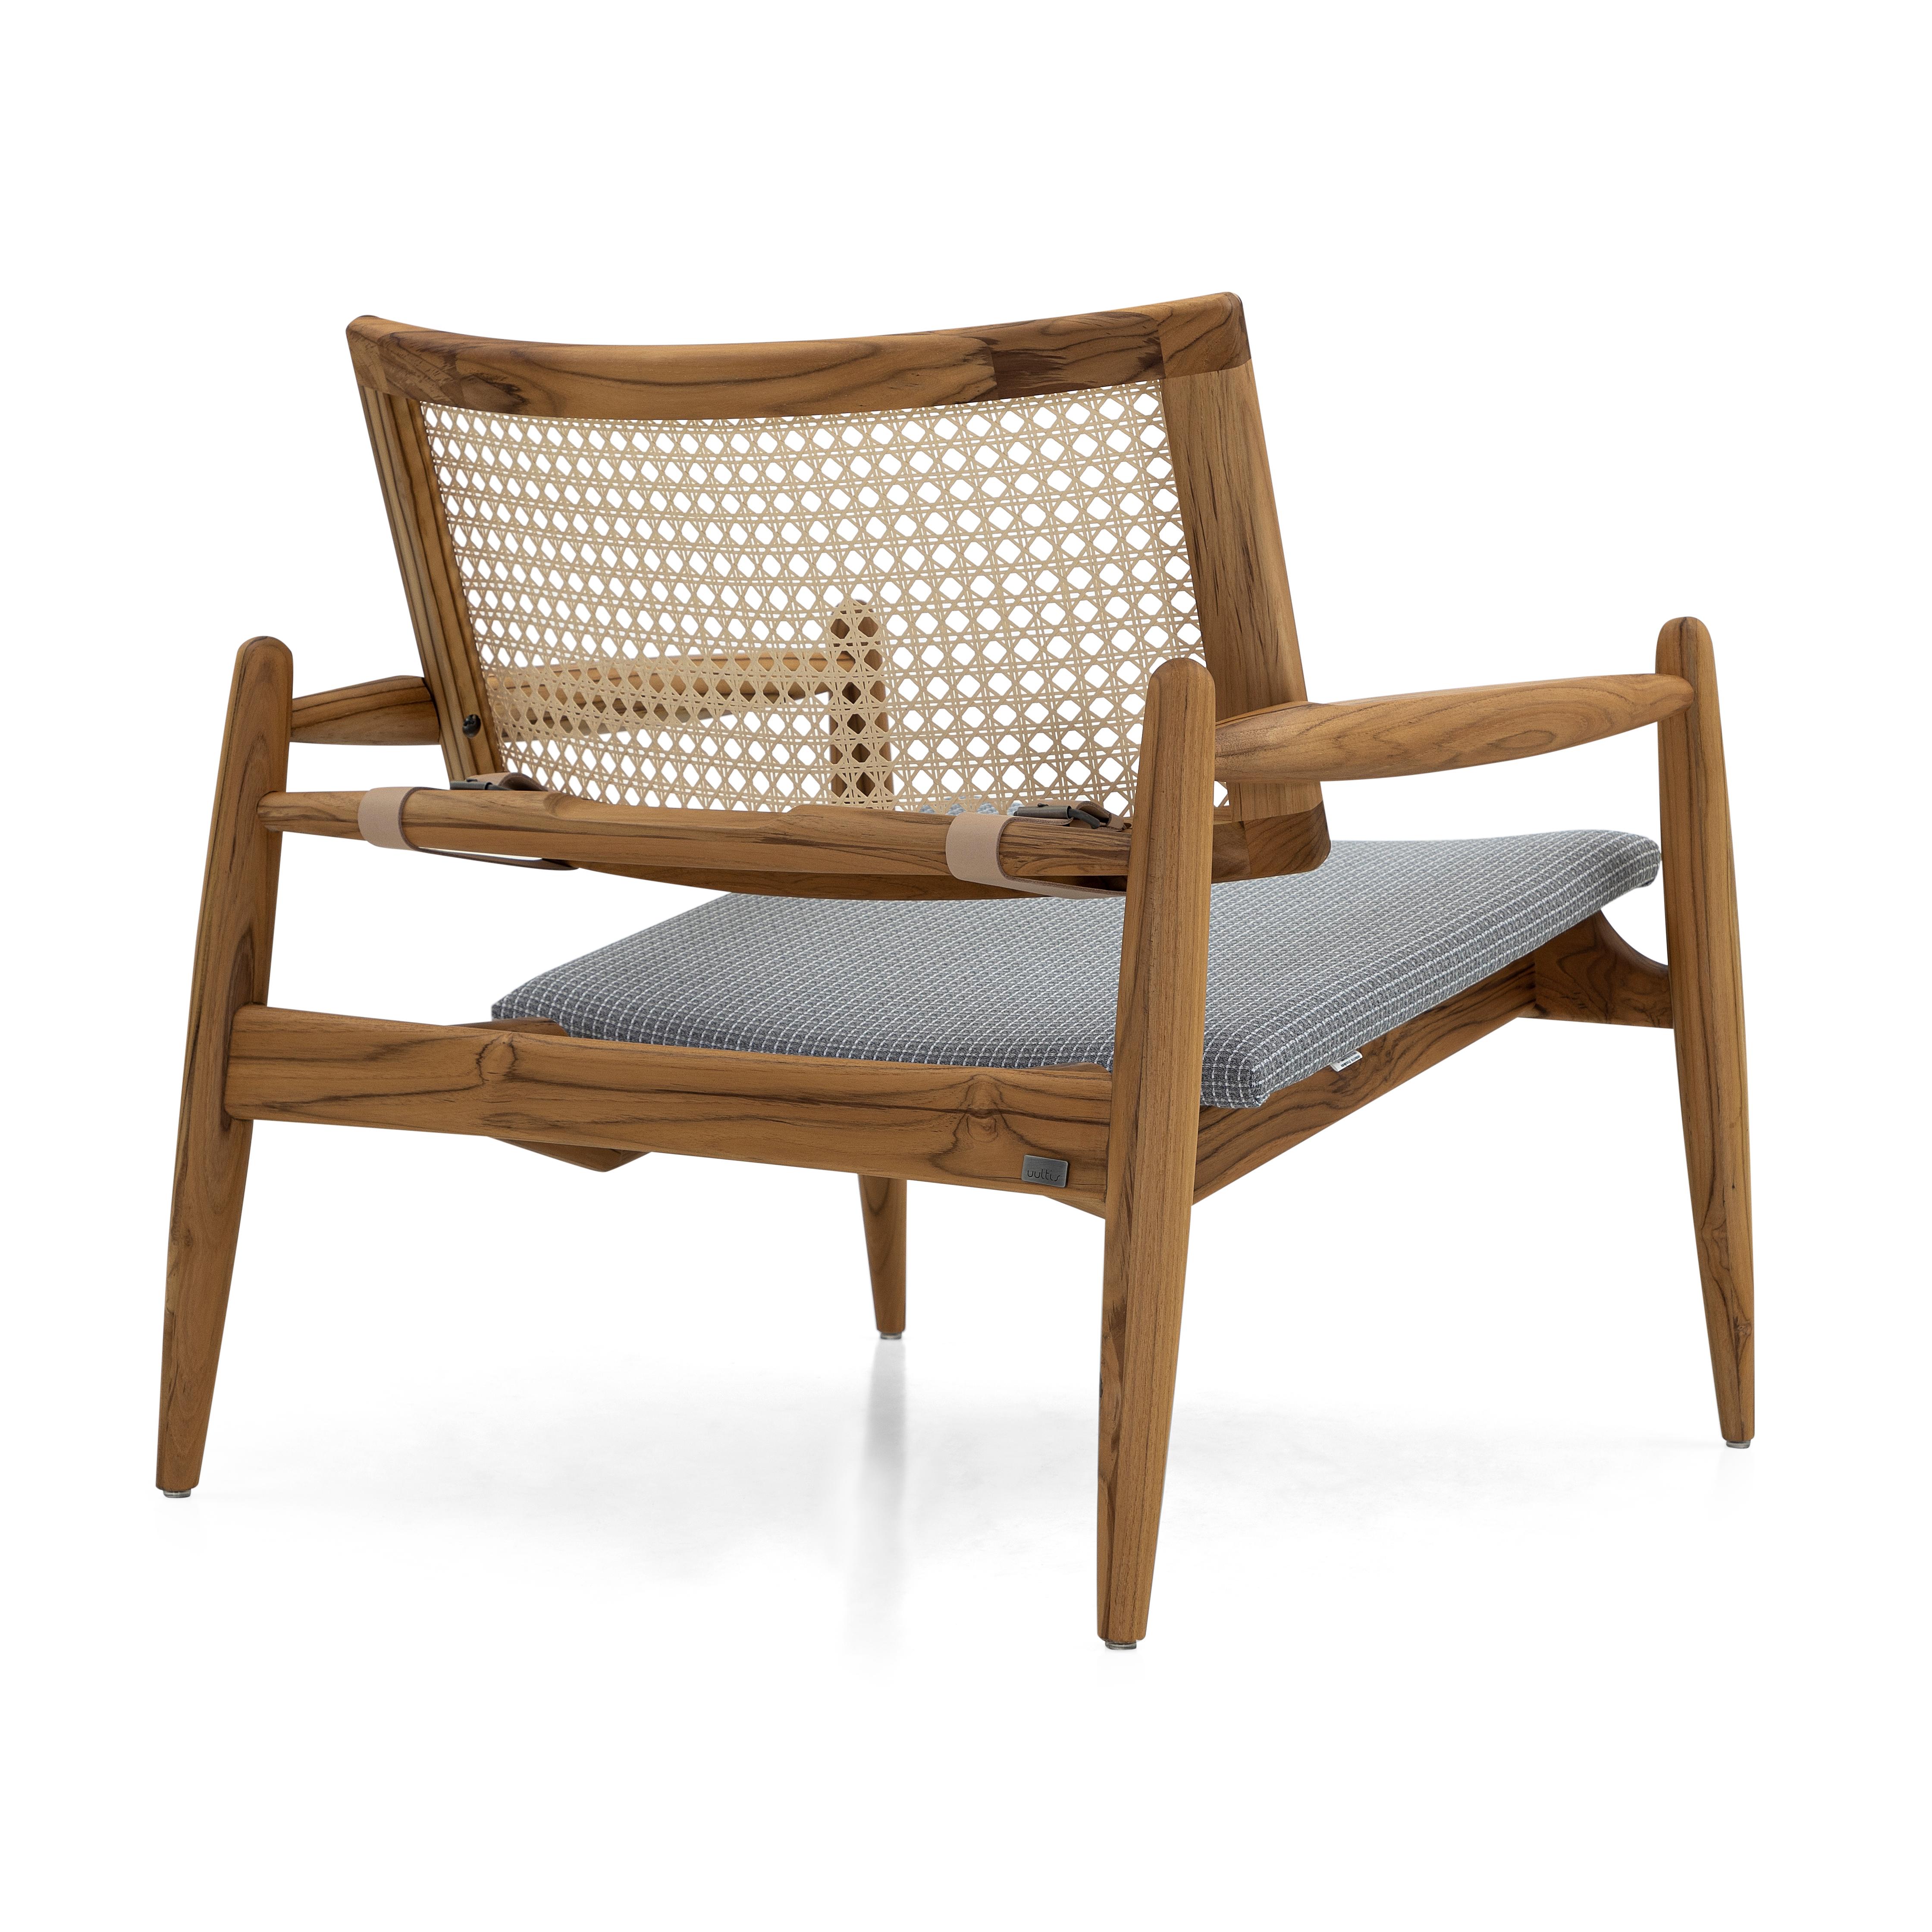 Soho Curved Cane-Back Chair in Teak Wood Finish and Gray Plaid Fabric In New Condition For Sale In Miami, FL